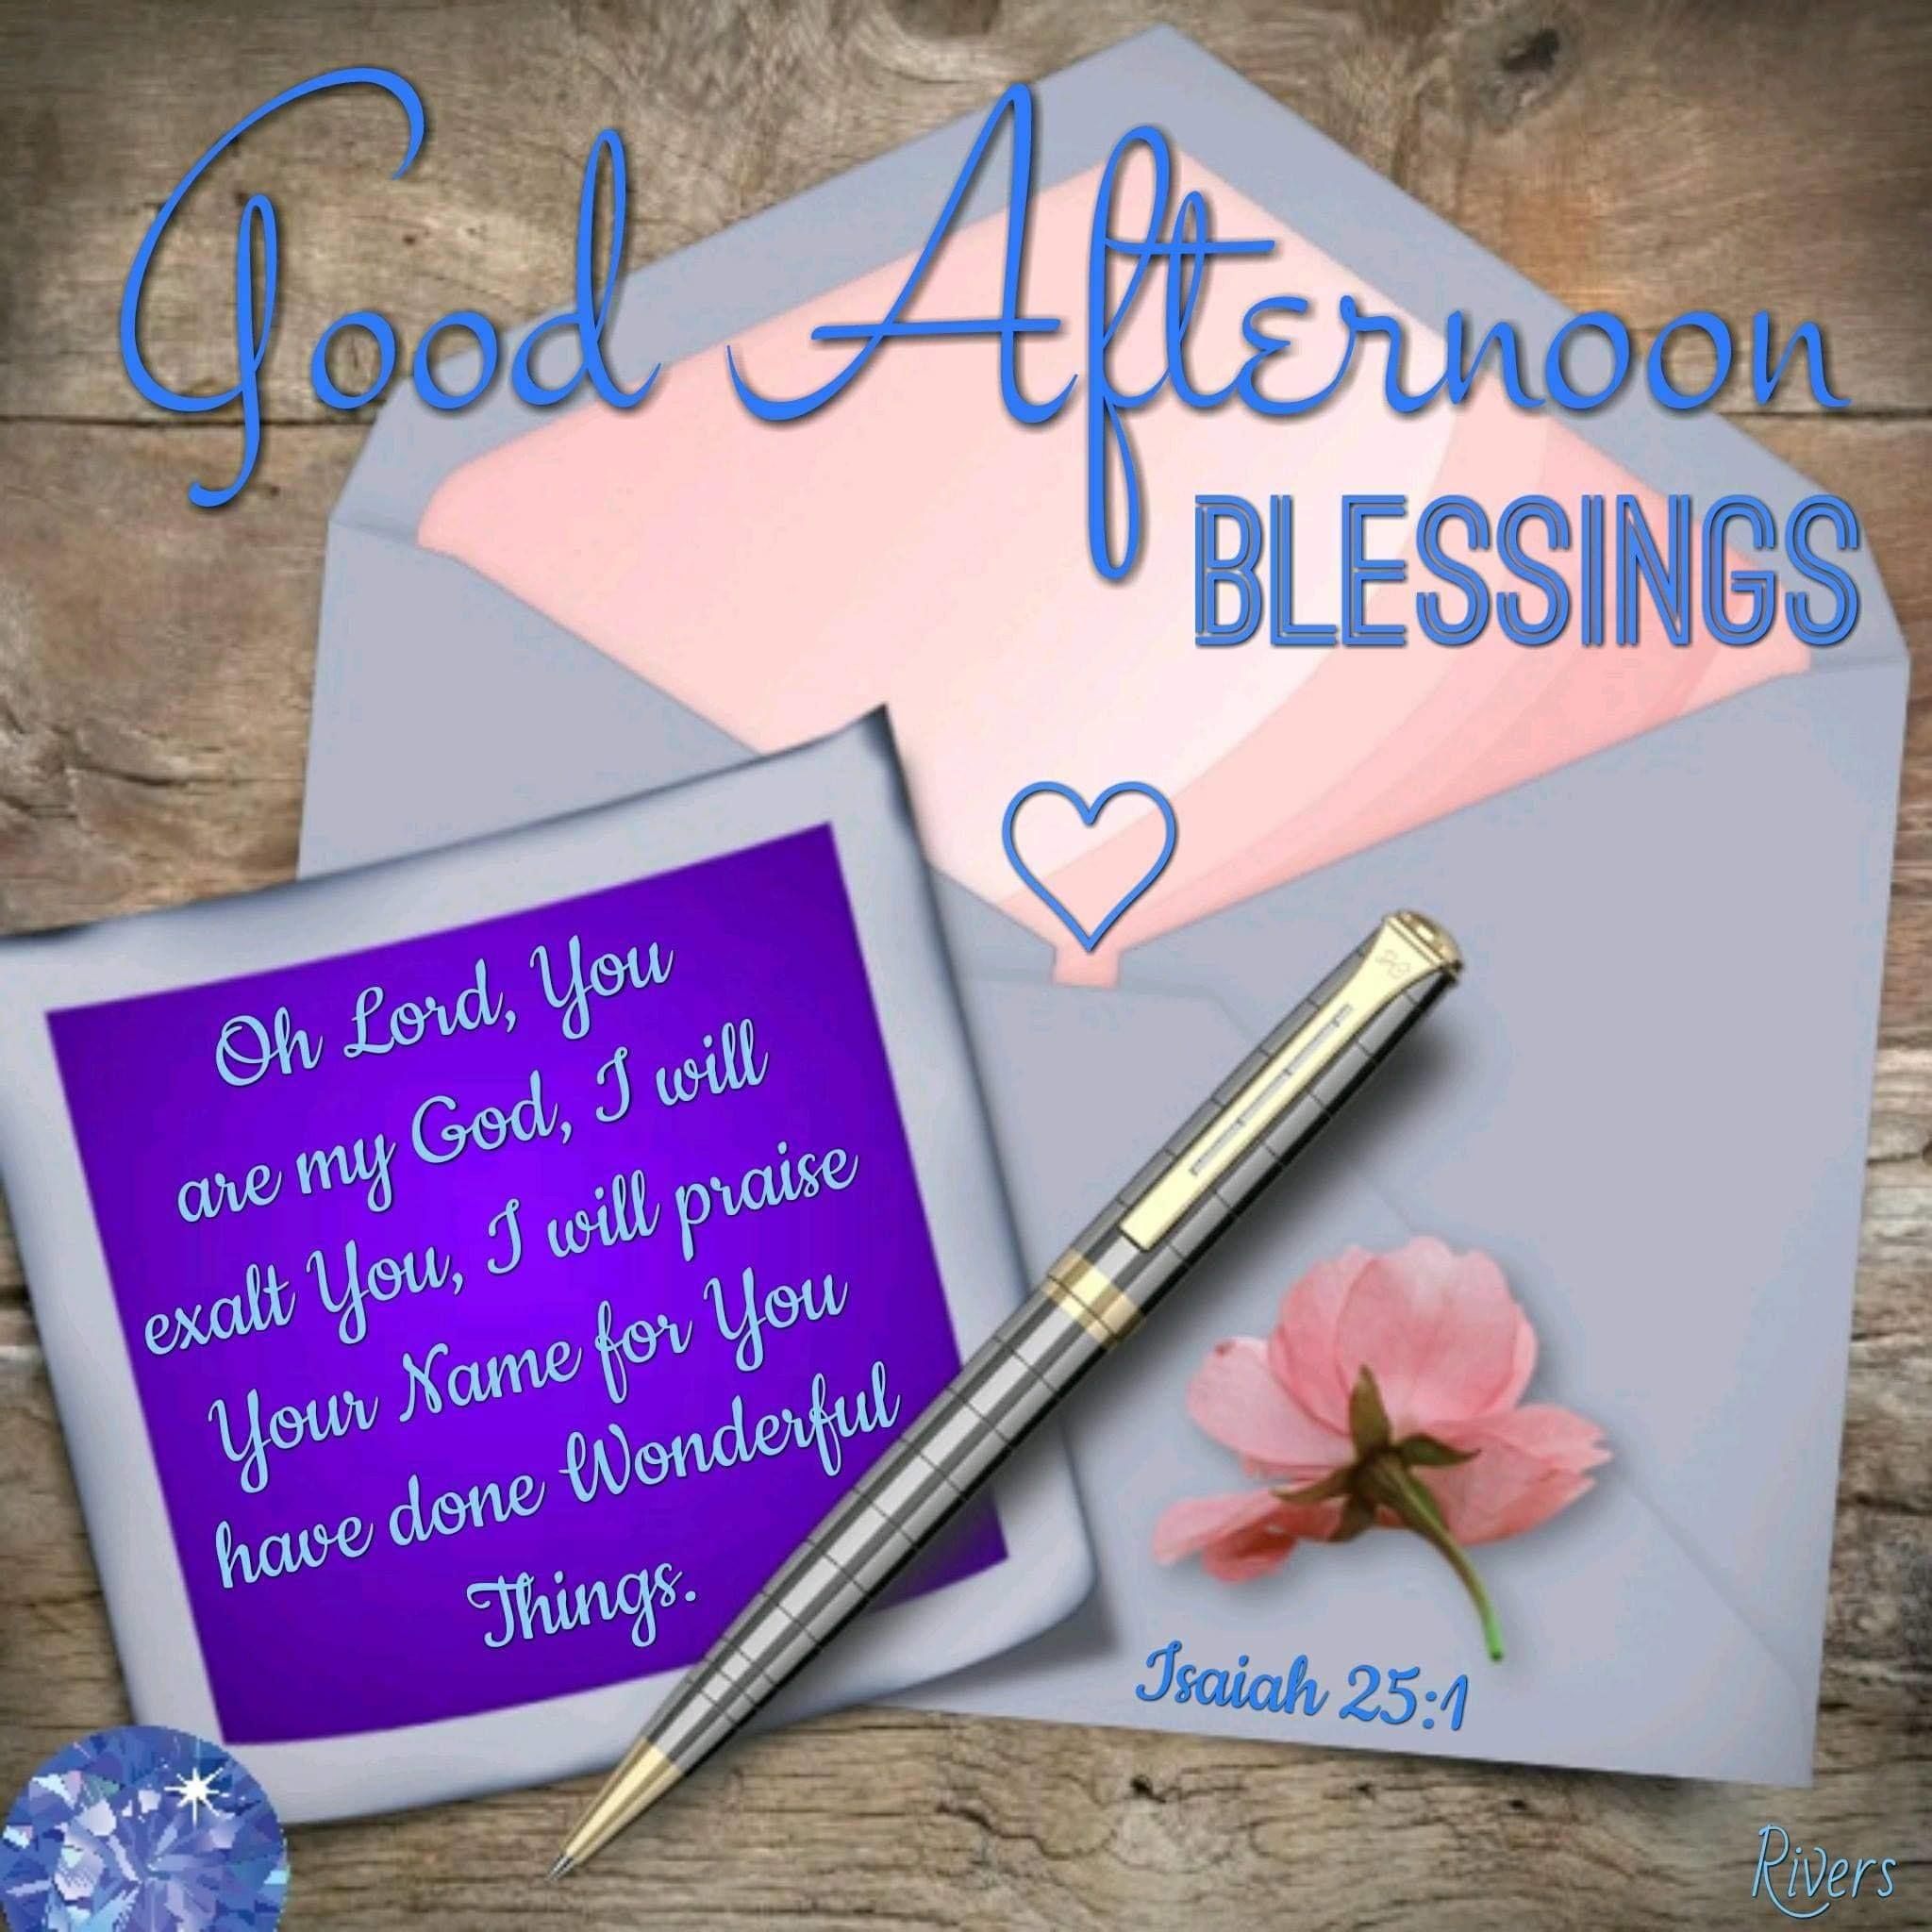 Good Afternoon Blessings